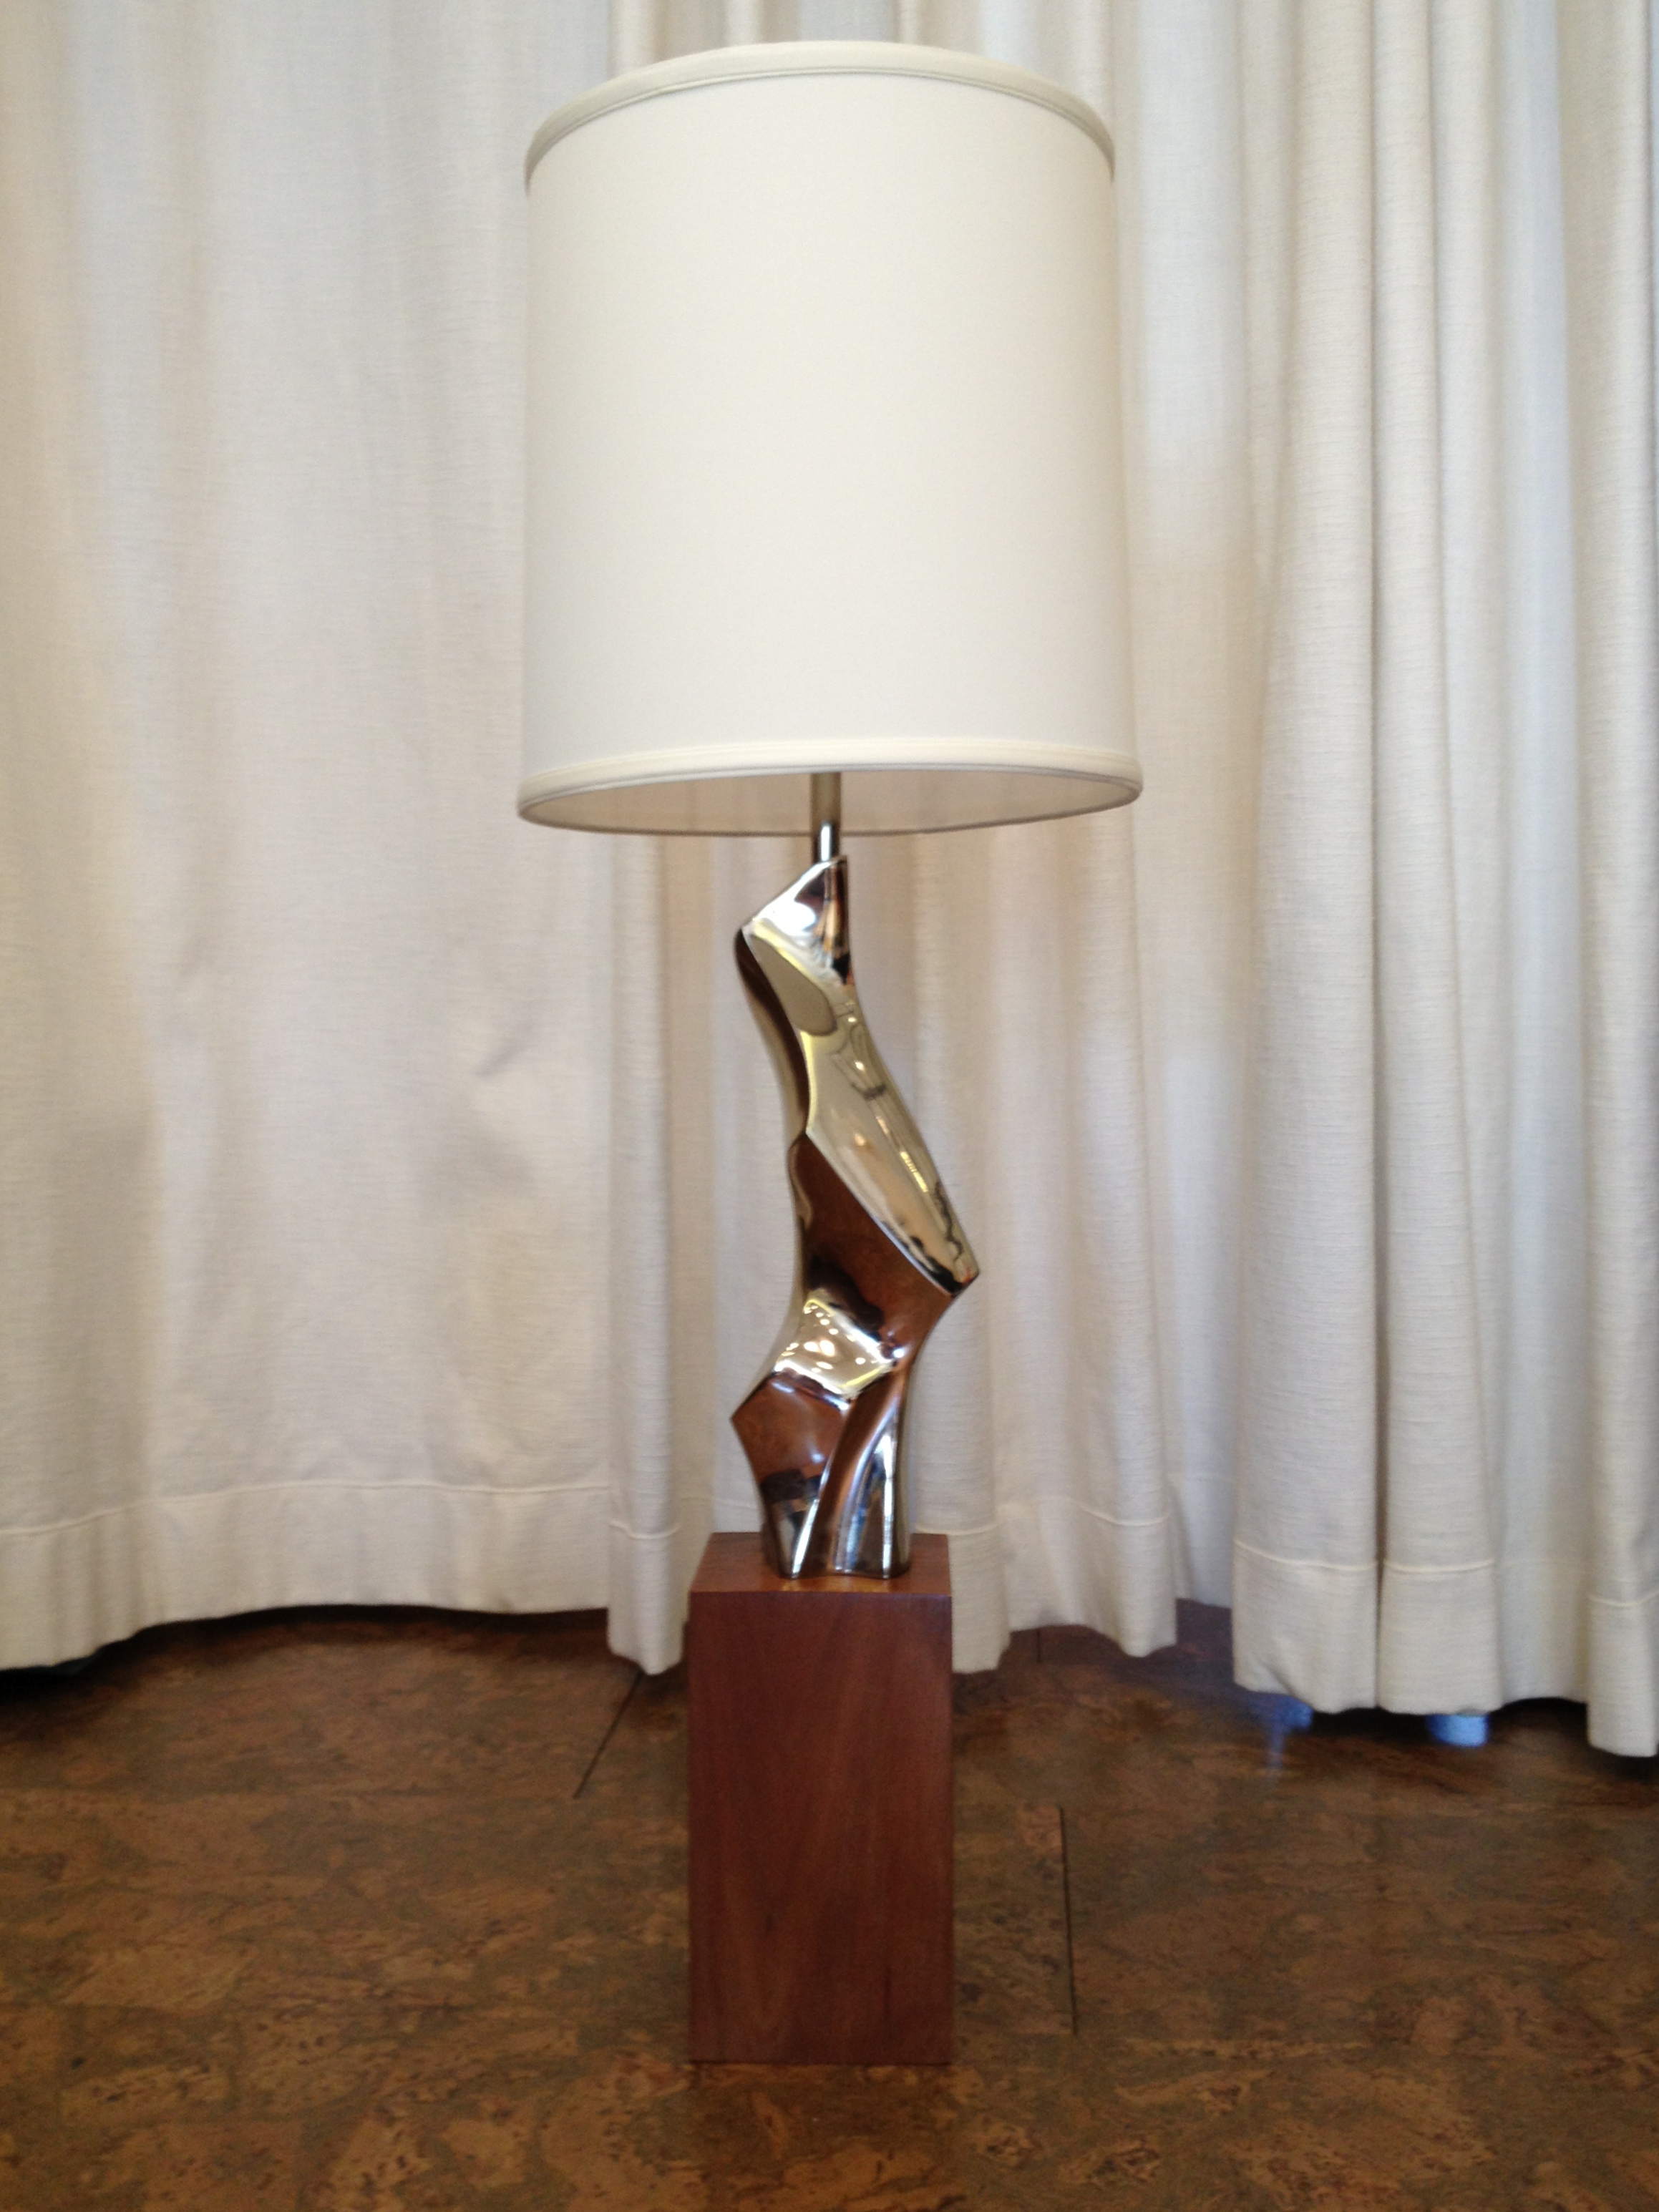 Abstract Amorphic Lamp by Maurizio Tempestini for Laurel